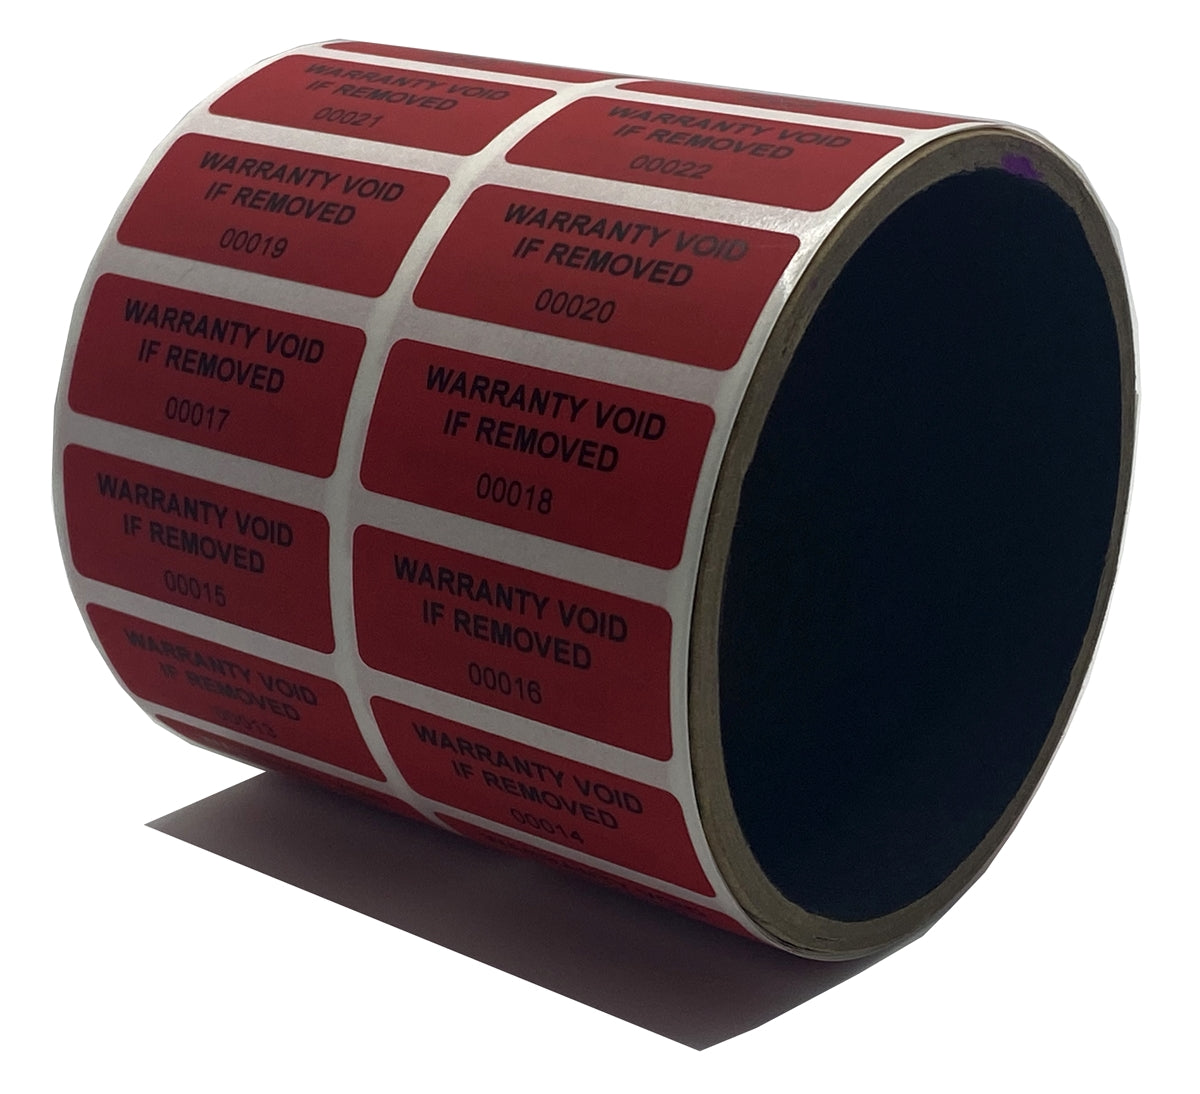 1,000 Tamper Evident Red Non Residue Security Labels TamperGuard® Seal Sticker, Rectangle 1.5" x 0.6" (38mm x 15mm). Printed: Warranty Void if Removed + Serialized